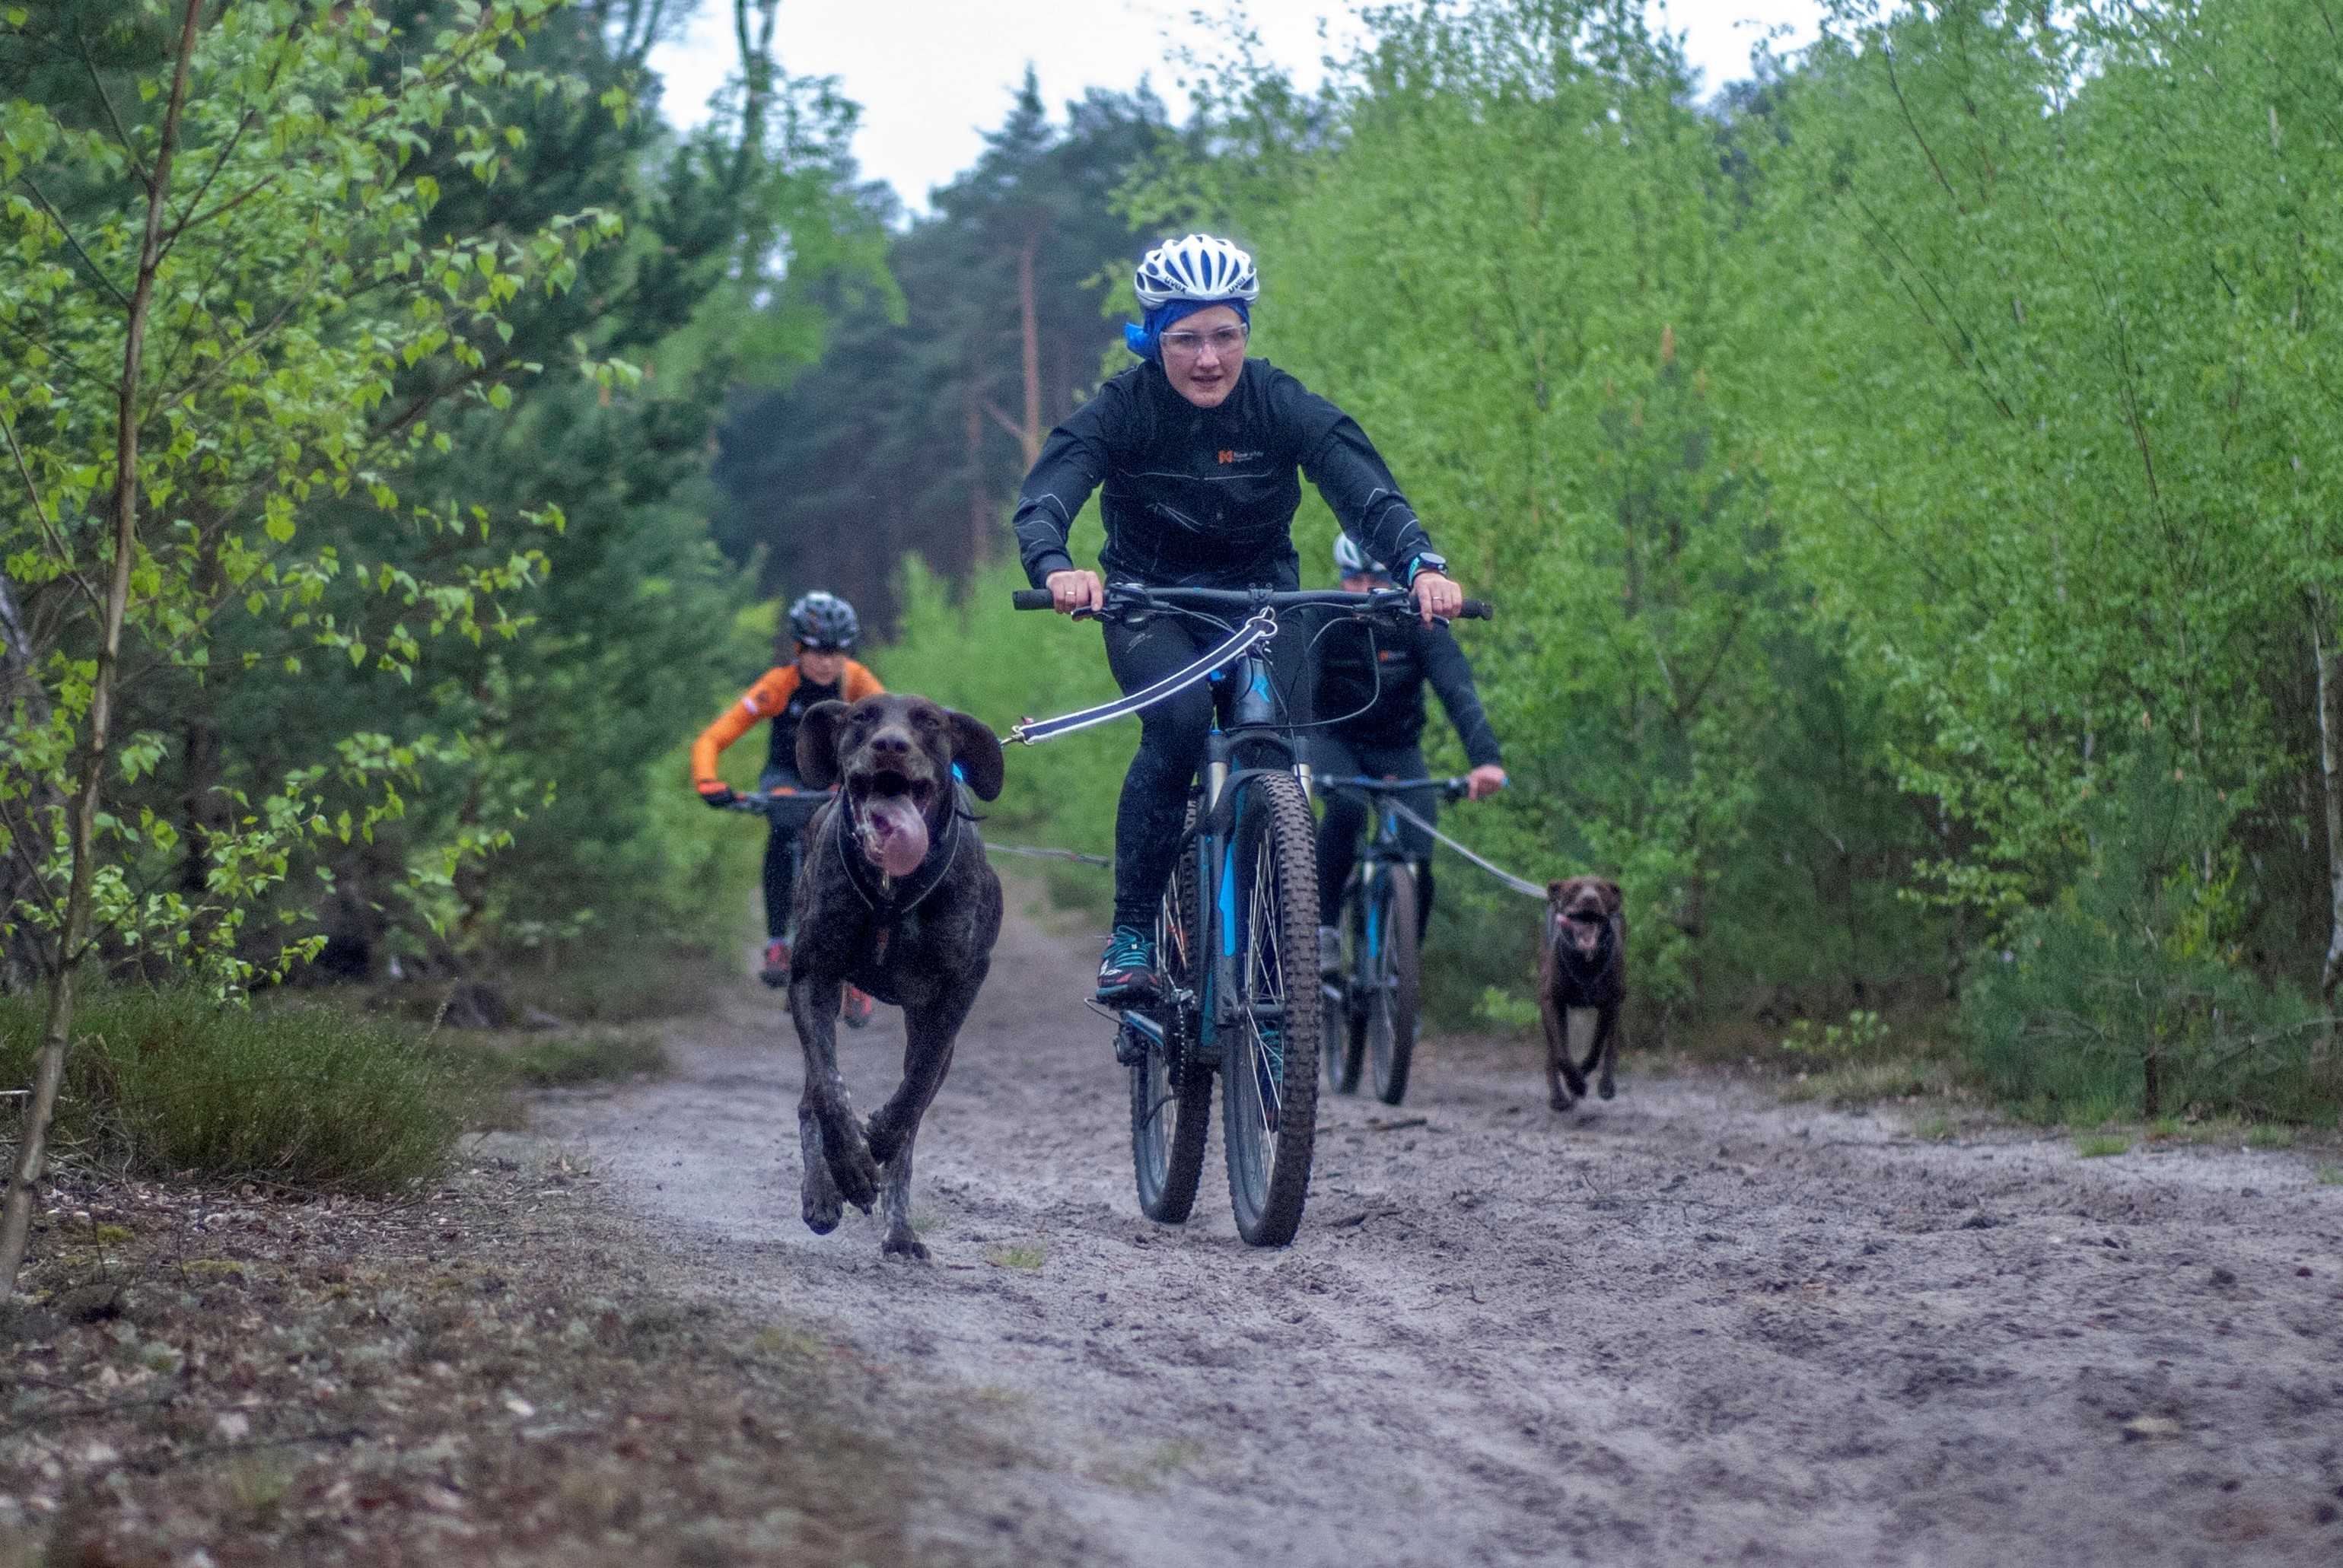 If you want to be good at canicross, train bikejoring too!